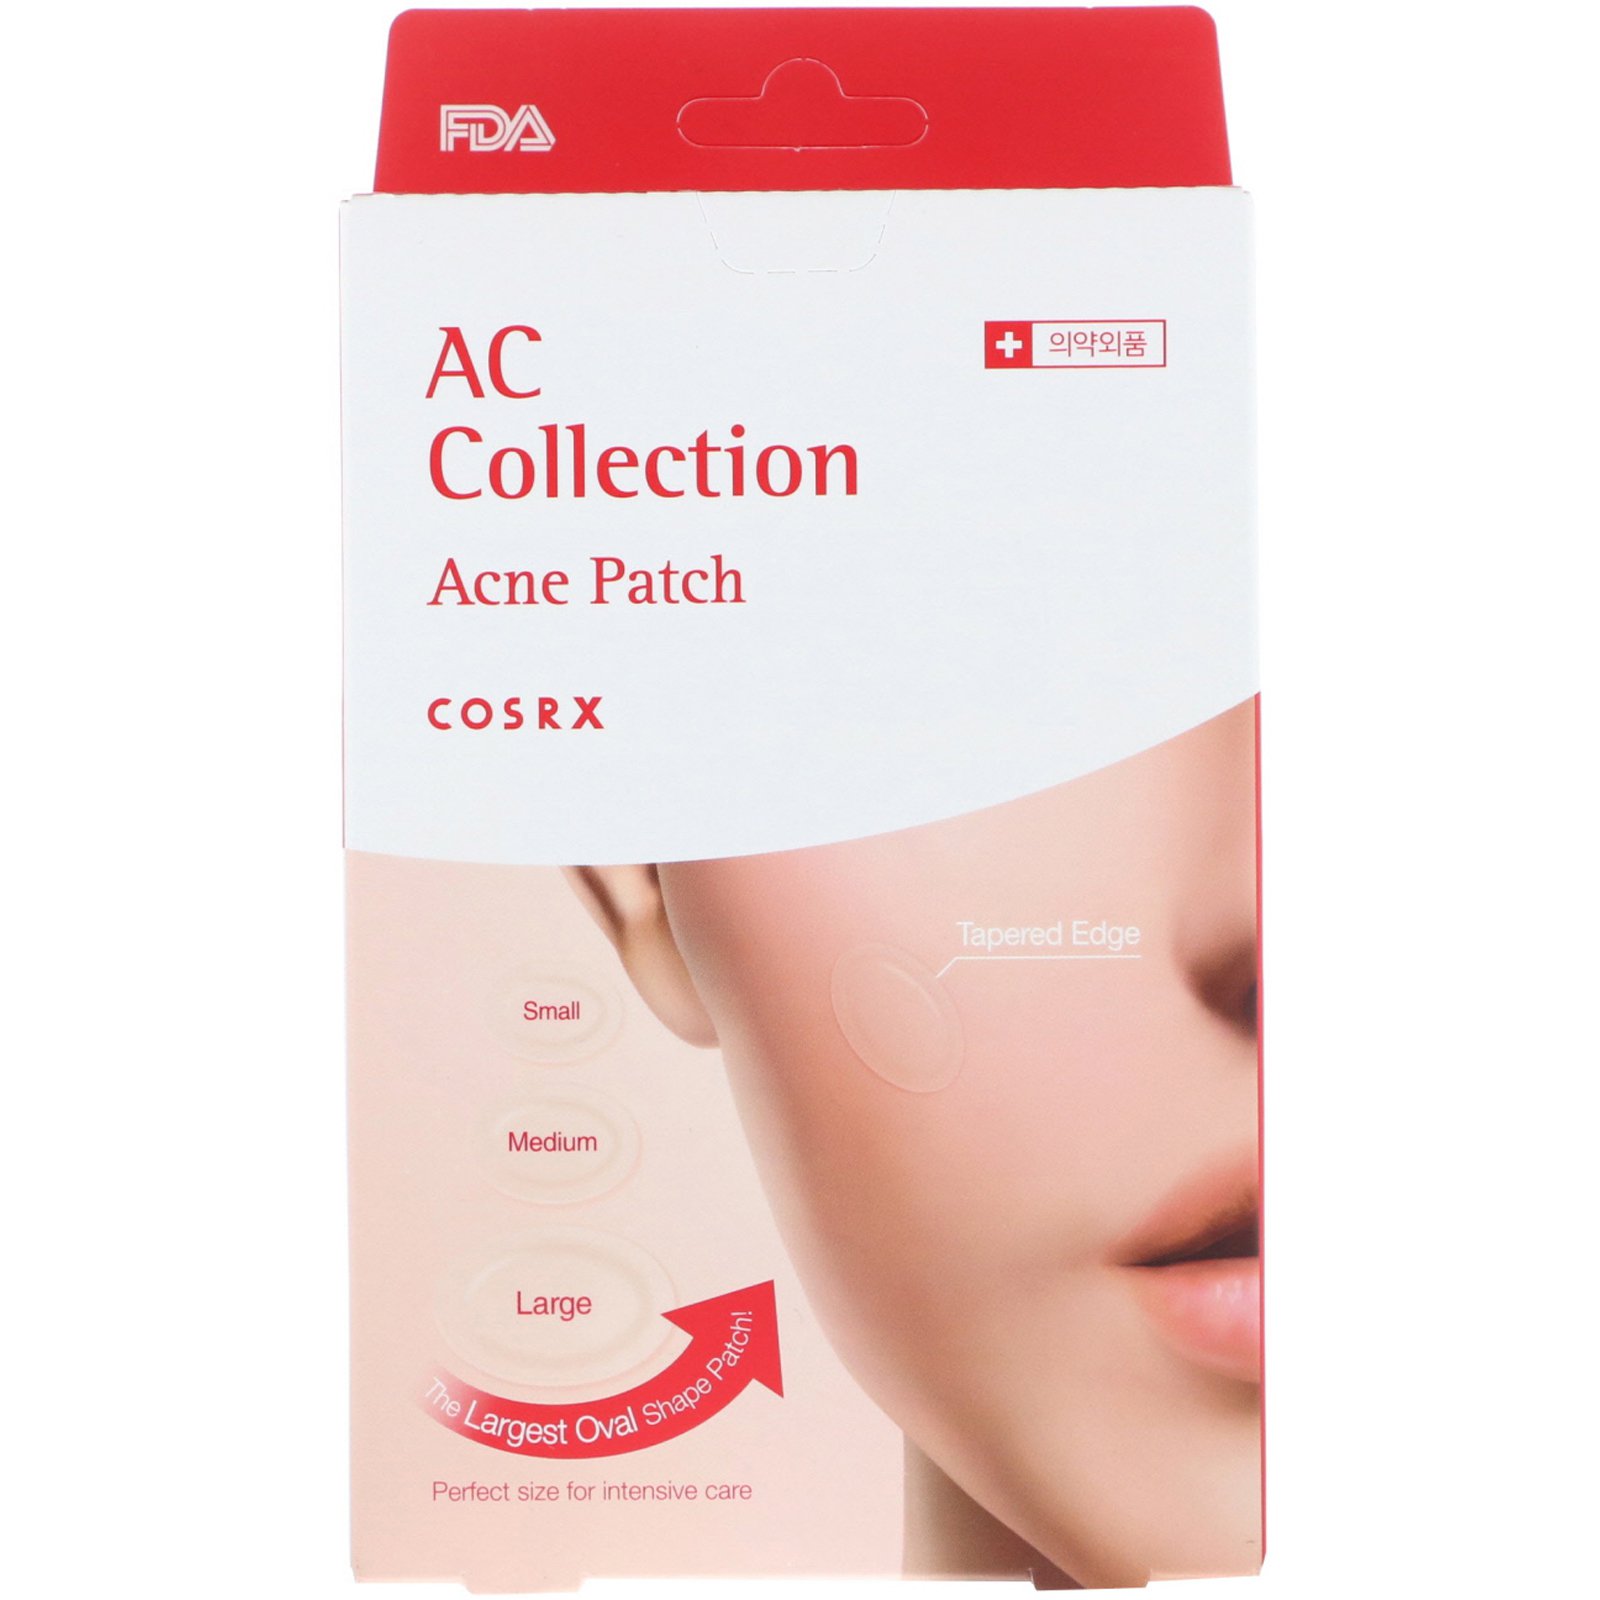 Ac collection. AC collection acne Patch 26шт. COSRX патчи от акне AC collection Patch 26 штук. COSRX AC collection acne Patch. Пластырь от прыщей корейский.